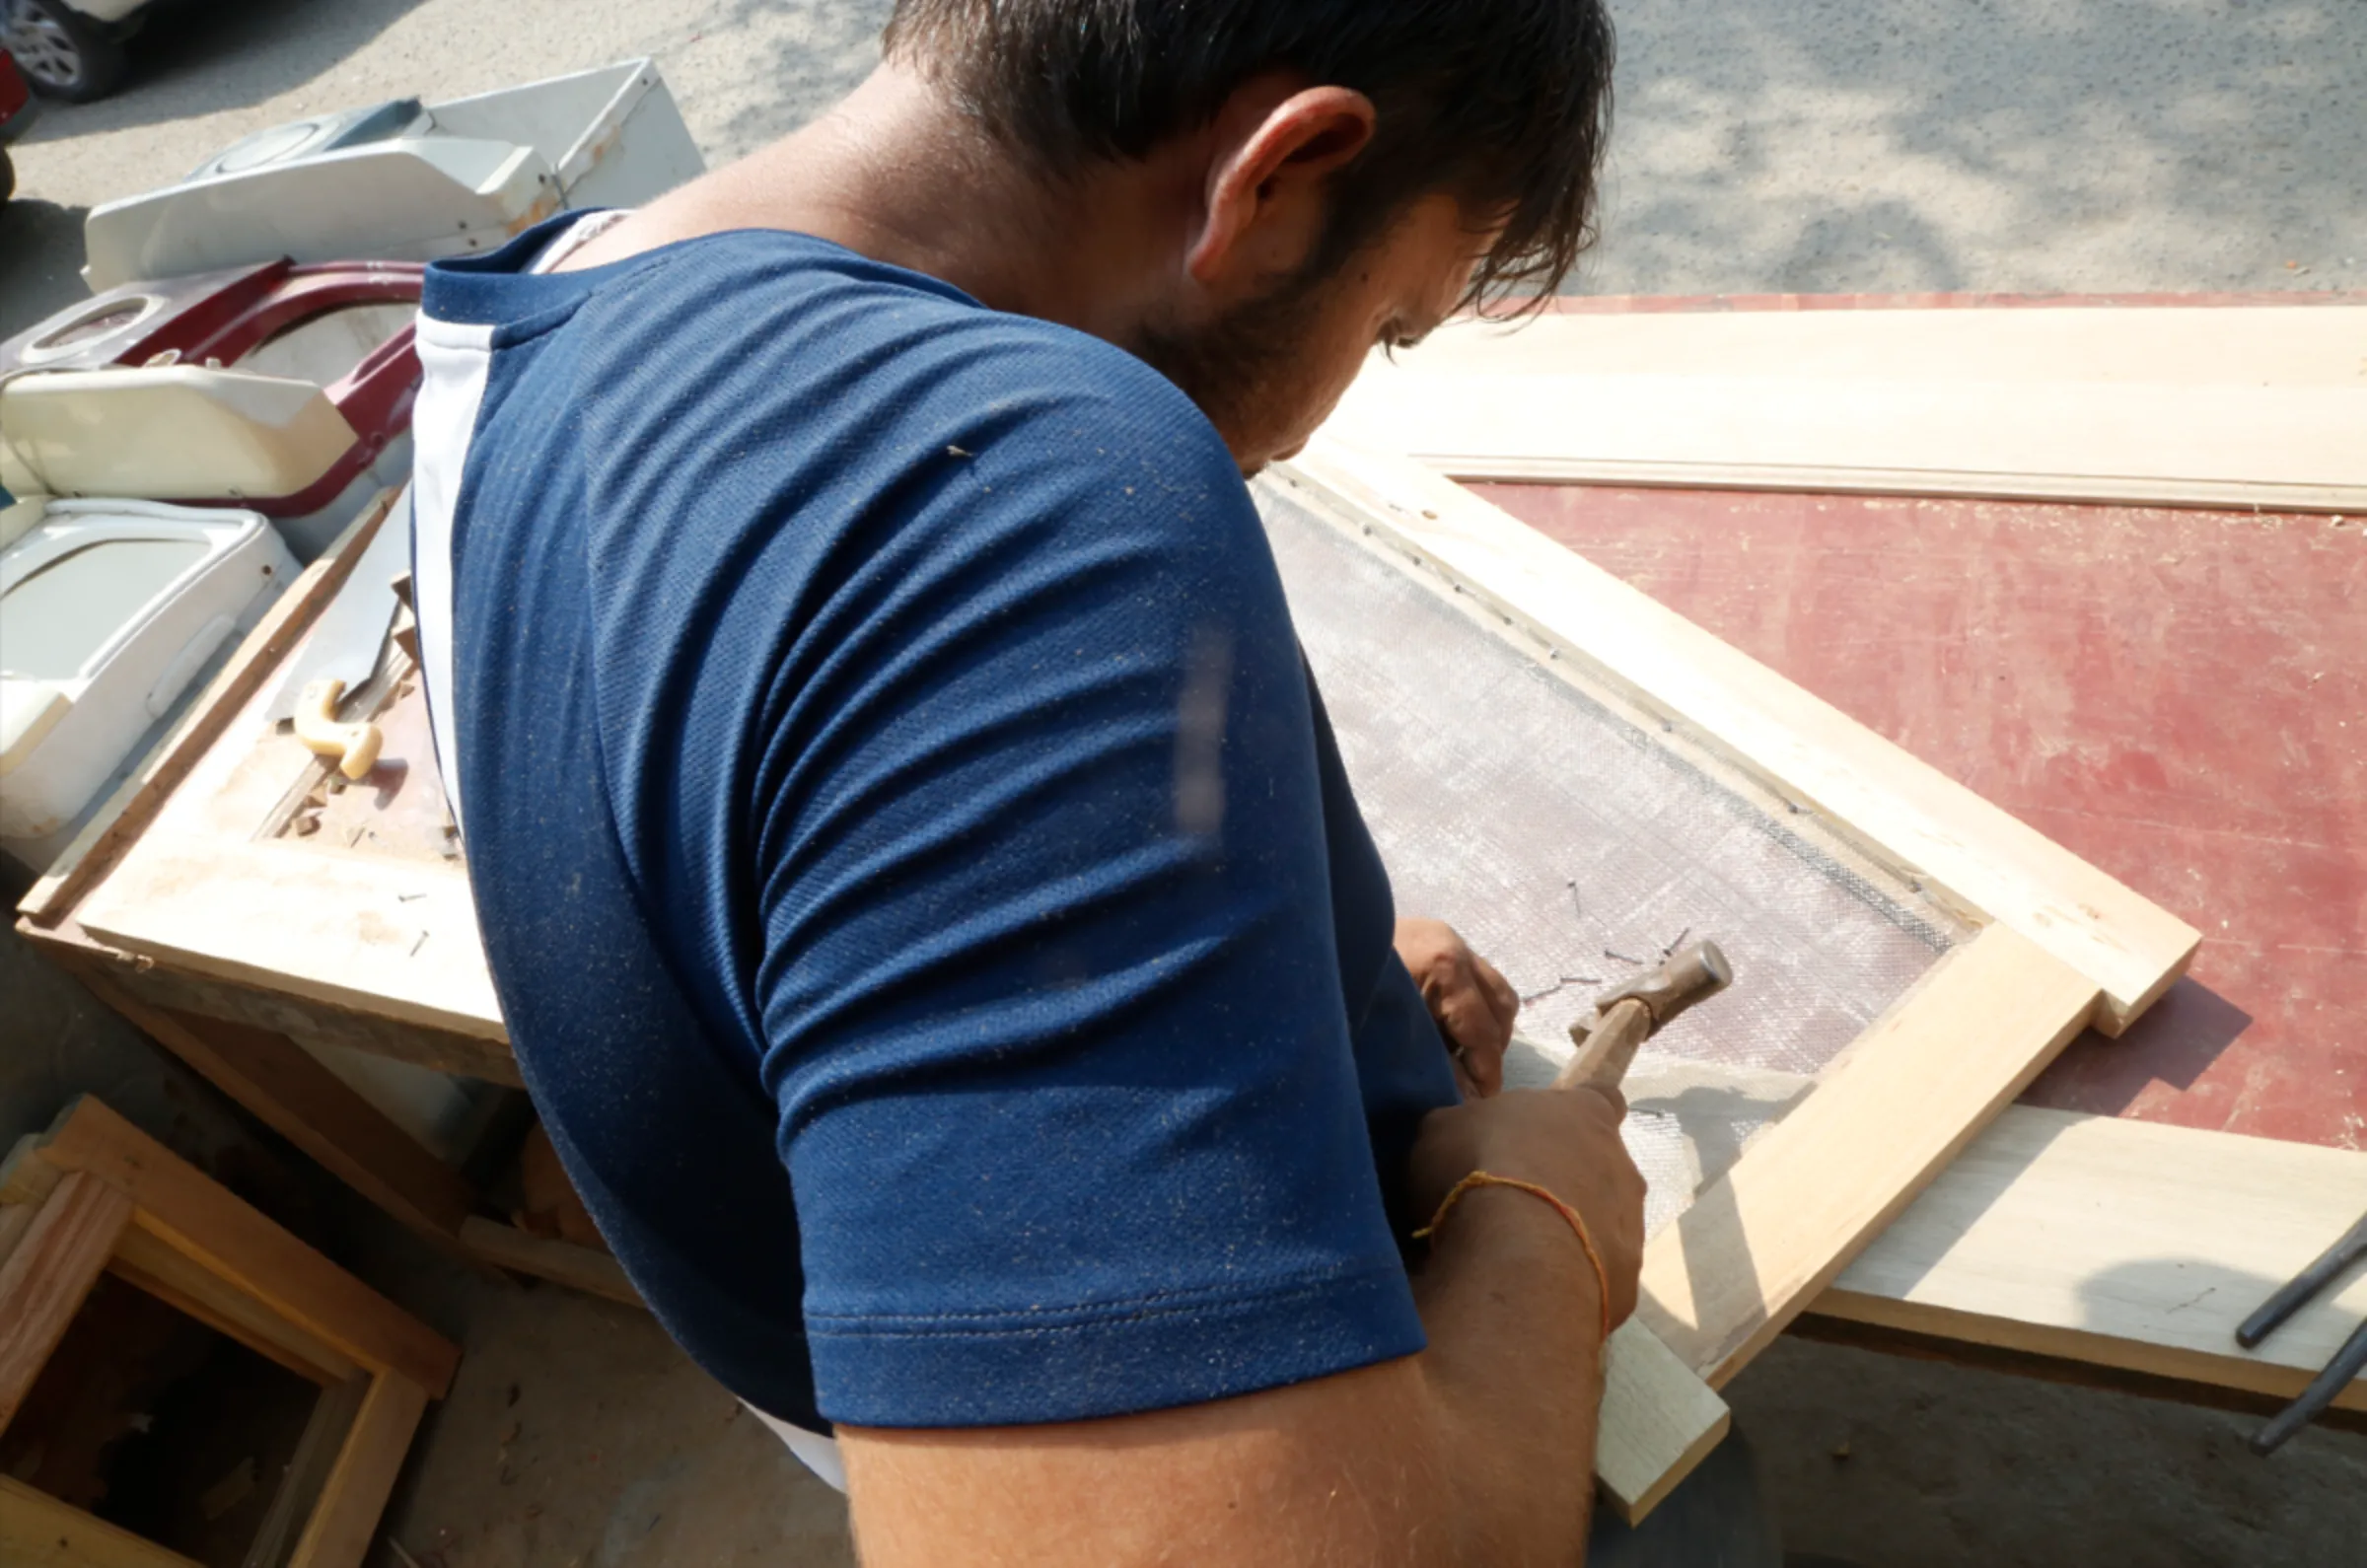 Rakesh Kumar, who signed up for a course with Indian edtech giant Byju's, hammers in a nail at his woodshop in Faridabad, India, October 18, 2022